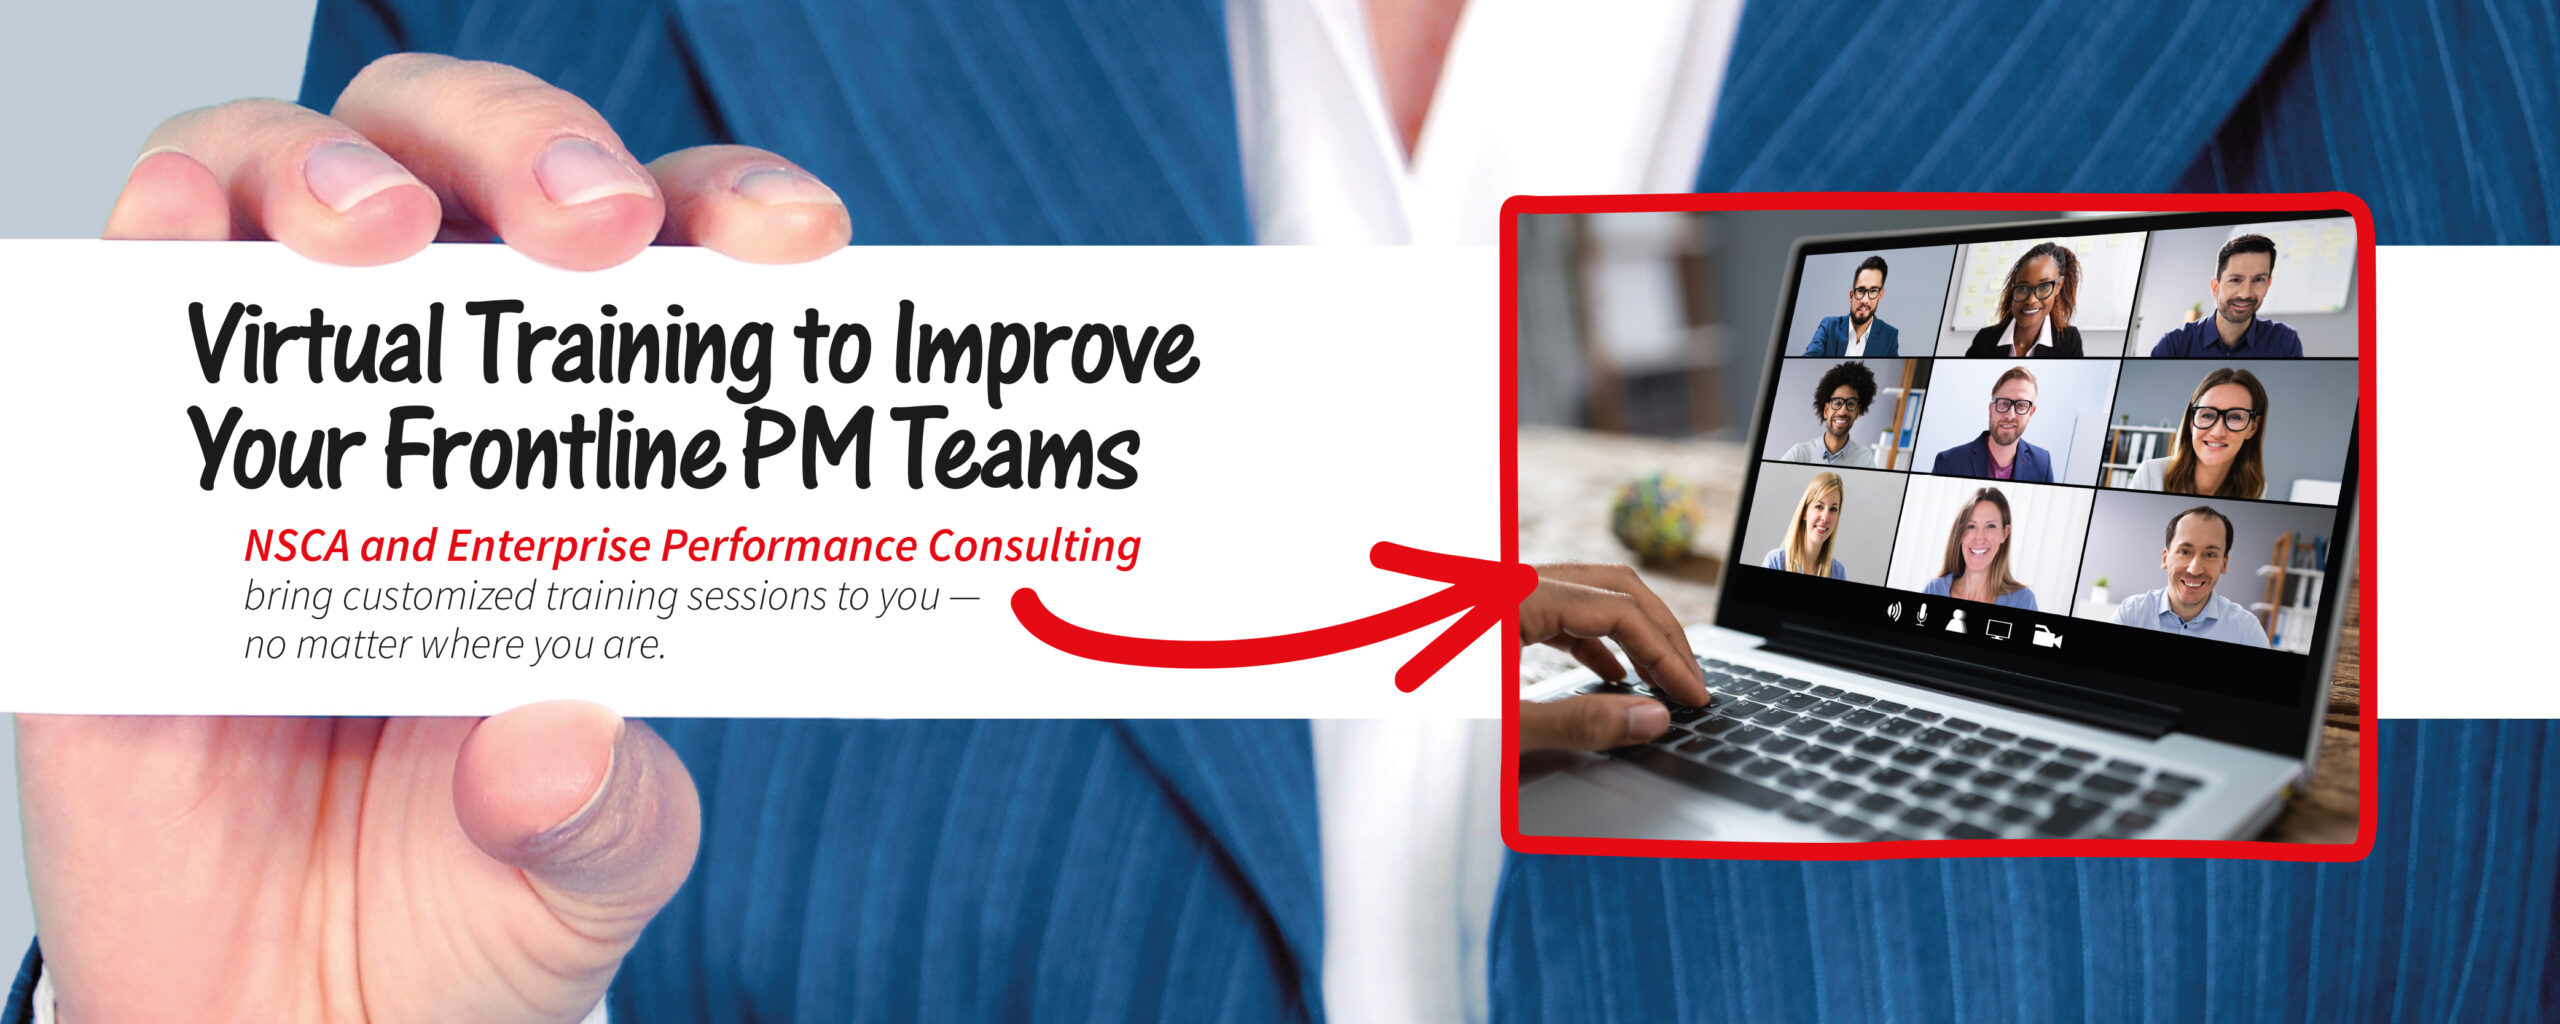 Virtual training to improve your Frontline PM teams